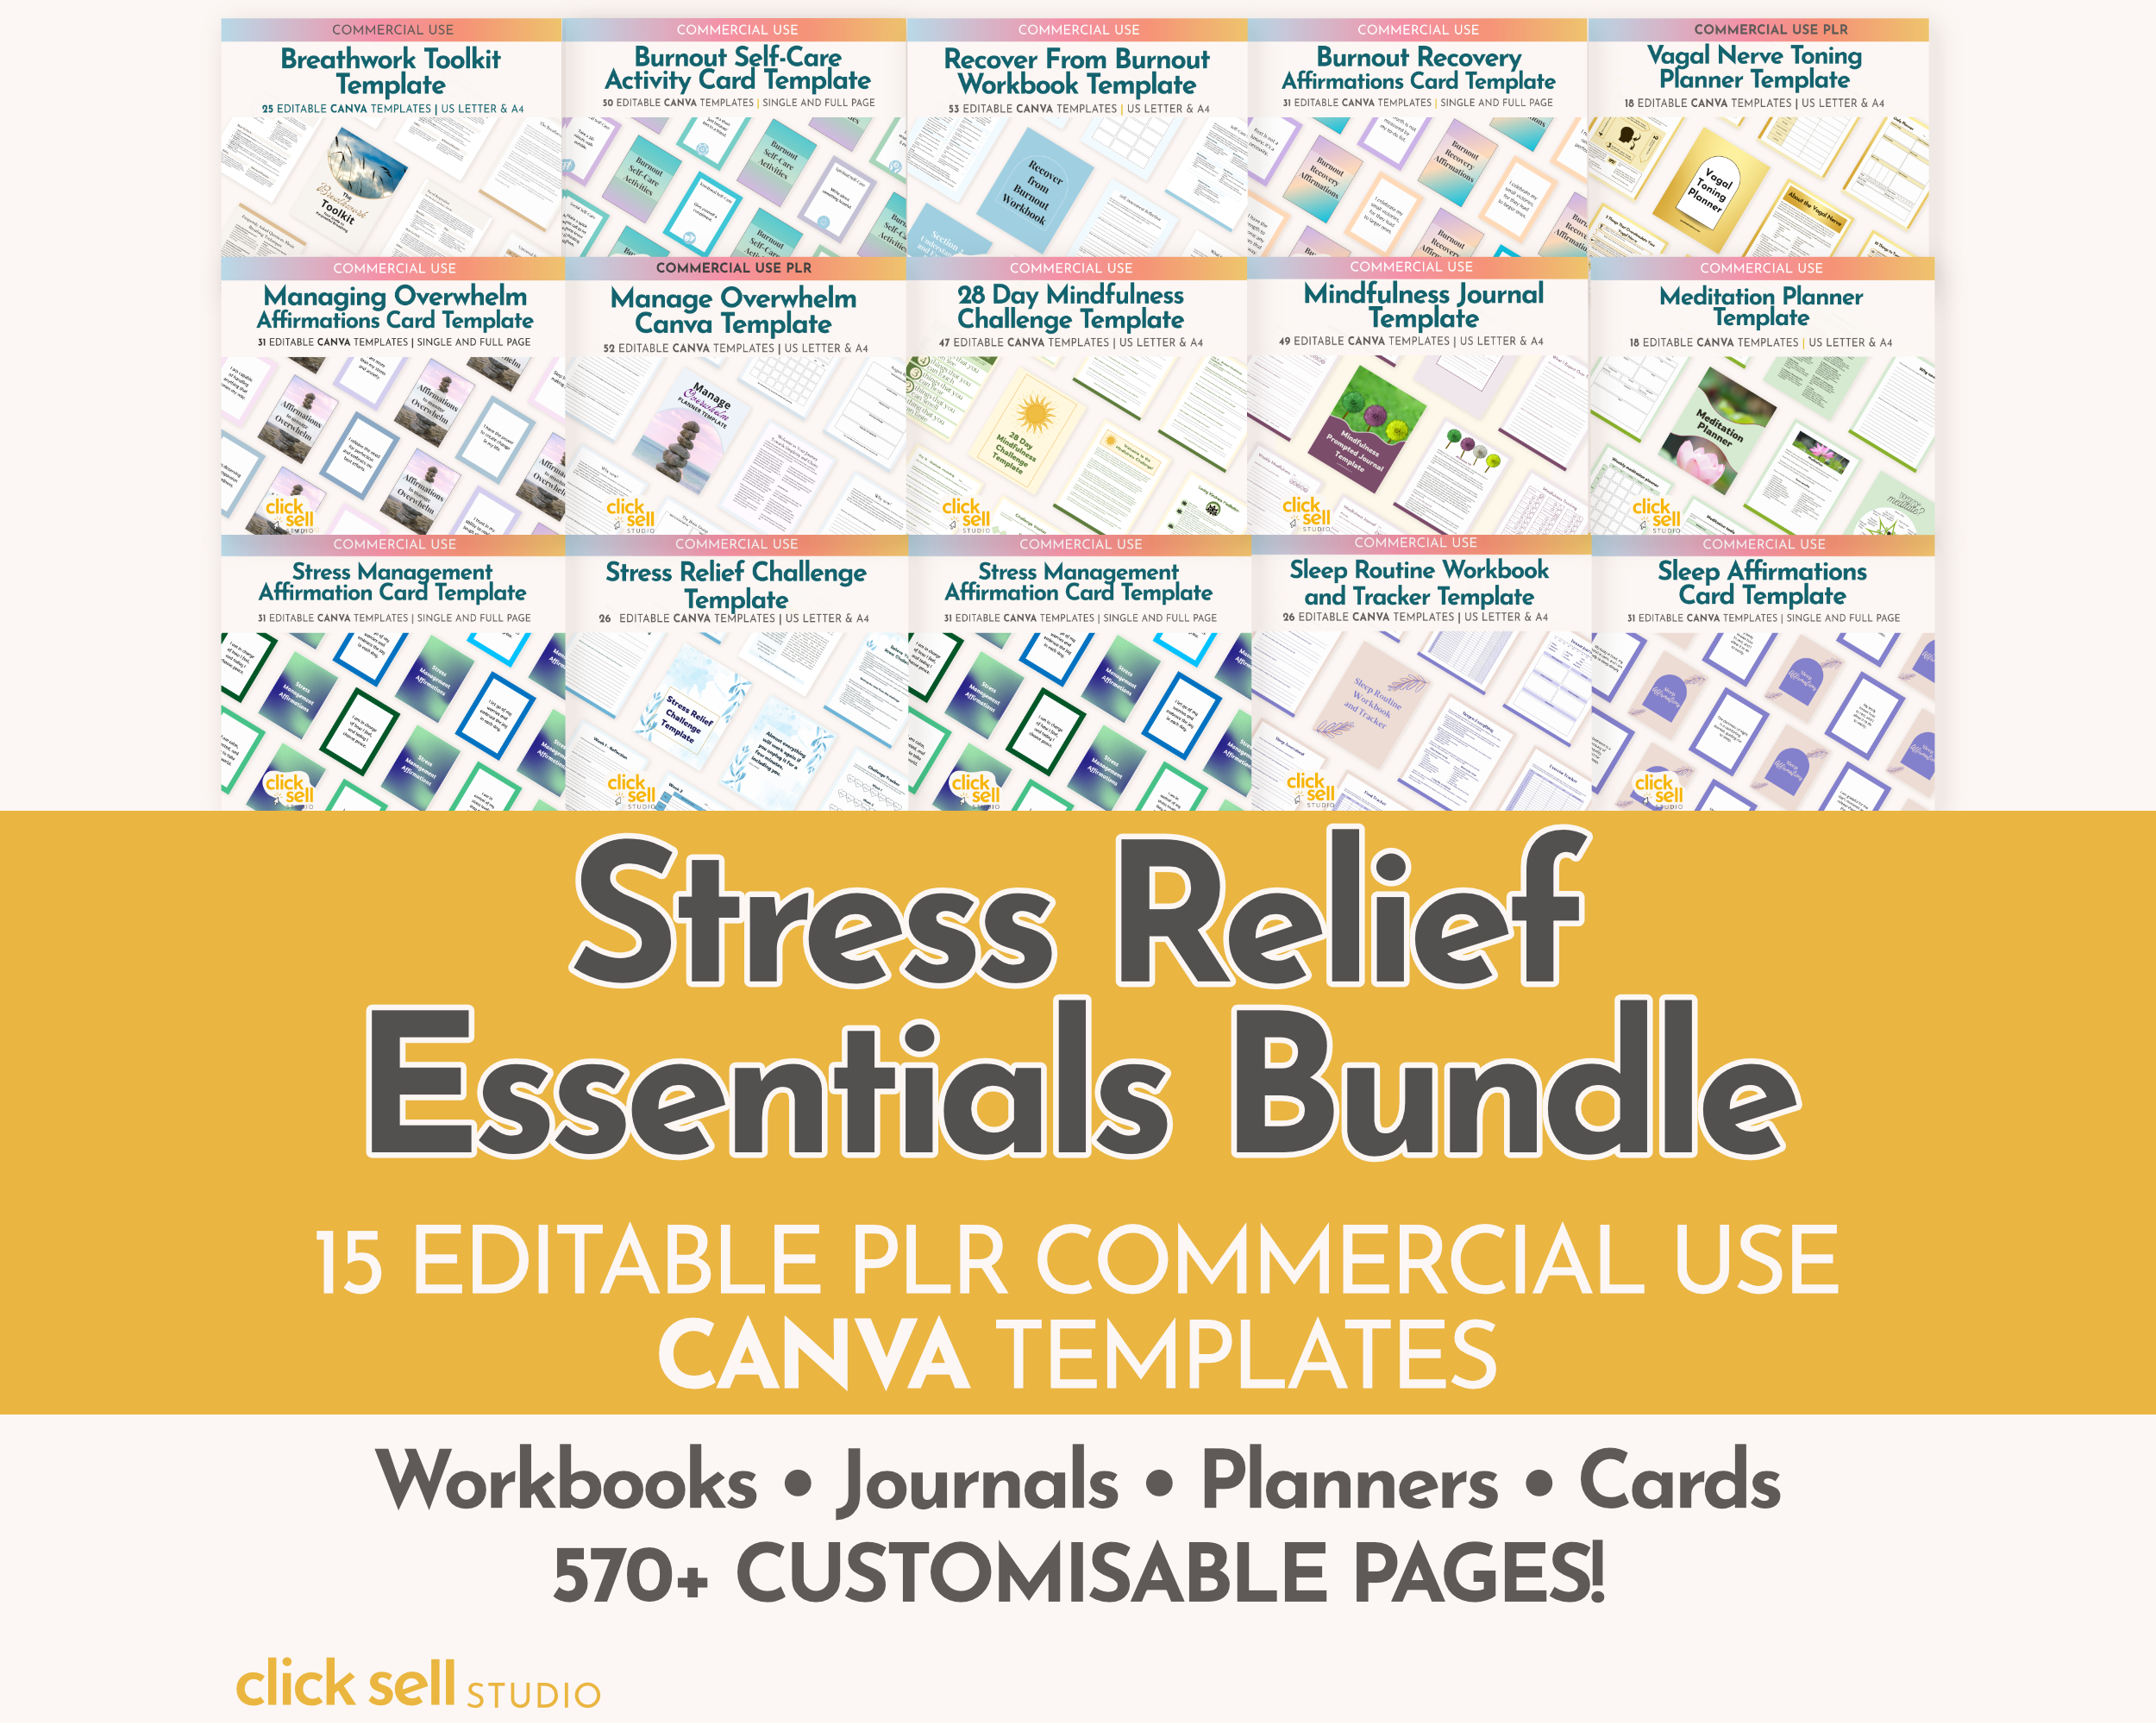 listing stress relief reseller canva template bundle_1